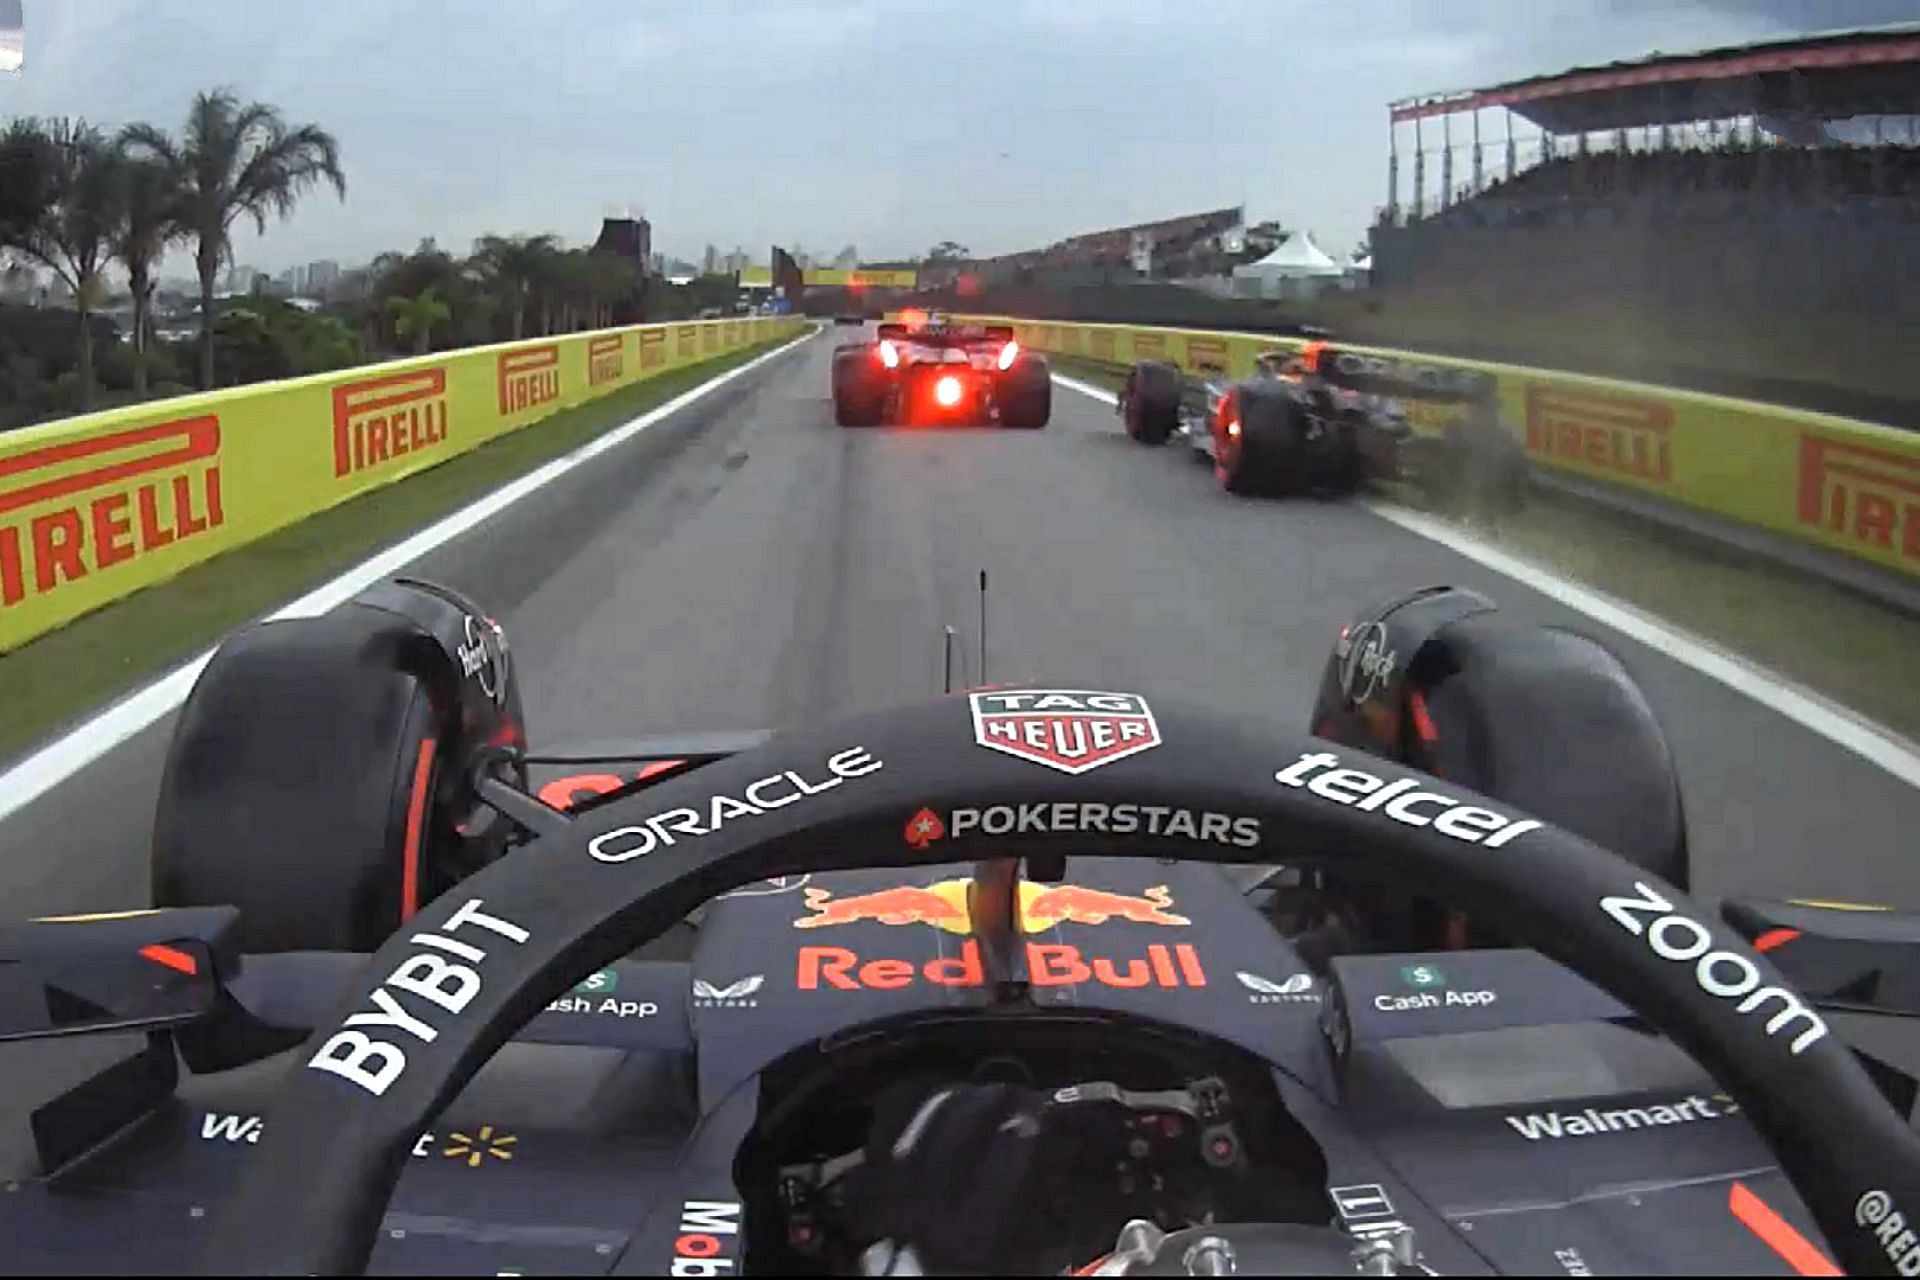 Max Verstappen overtaking Sergio Perez and other cars in pit exit during 2023 F1 Brazilian Grand Prix qualifying session (Image via Sportskeeda)